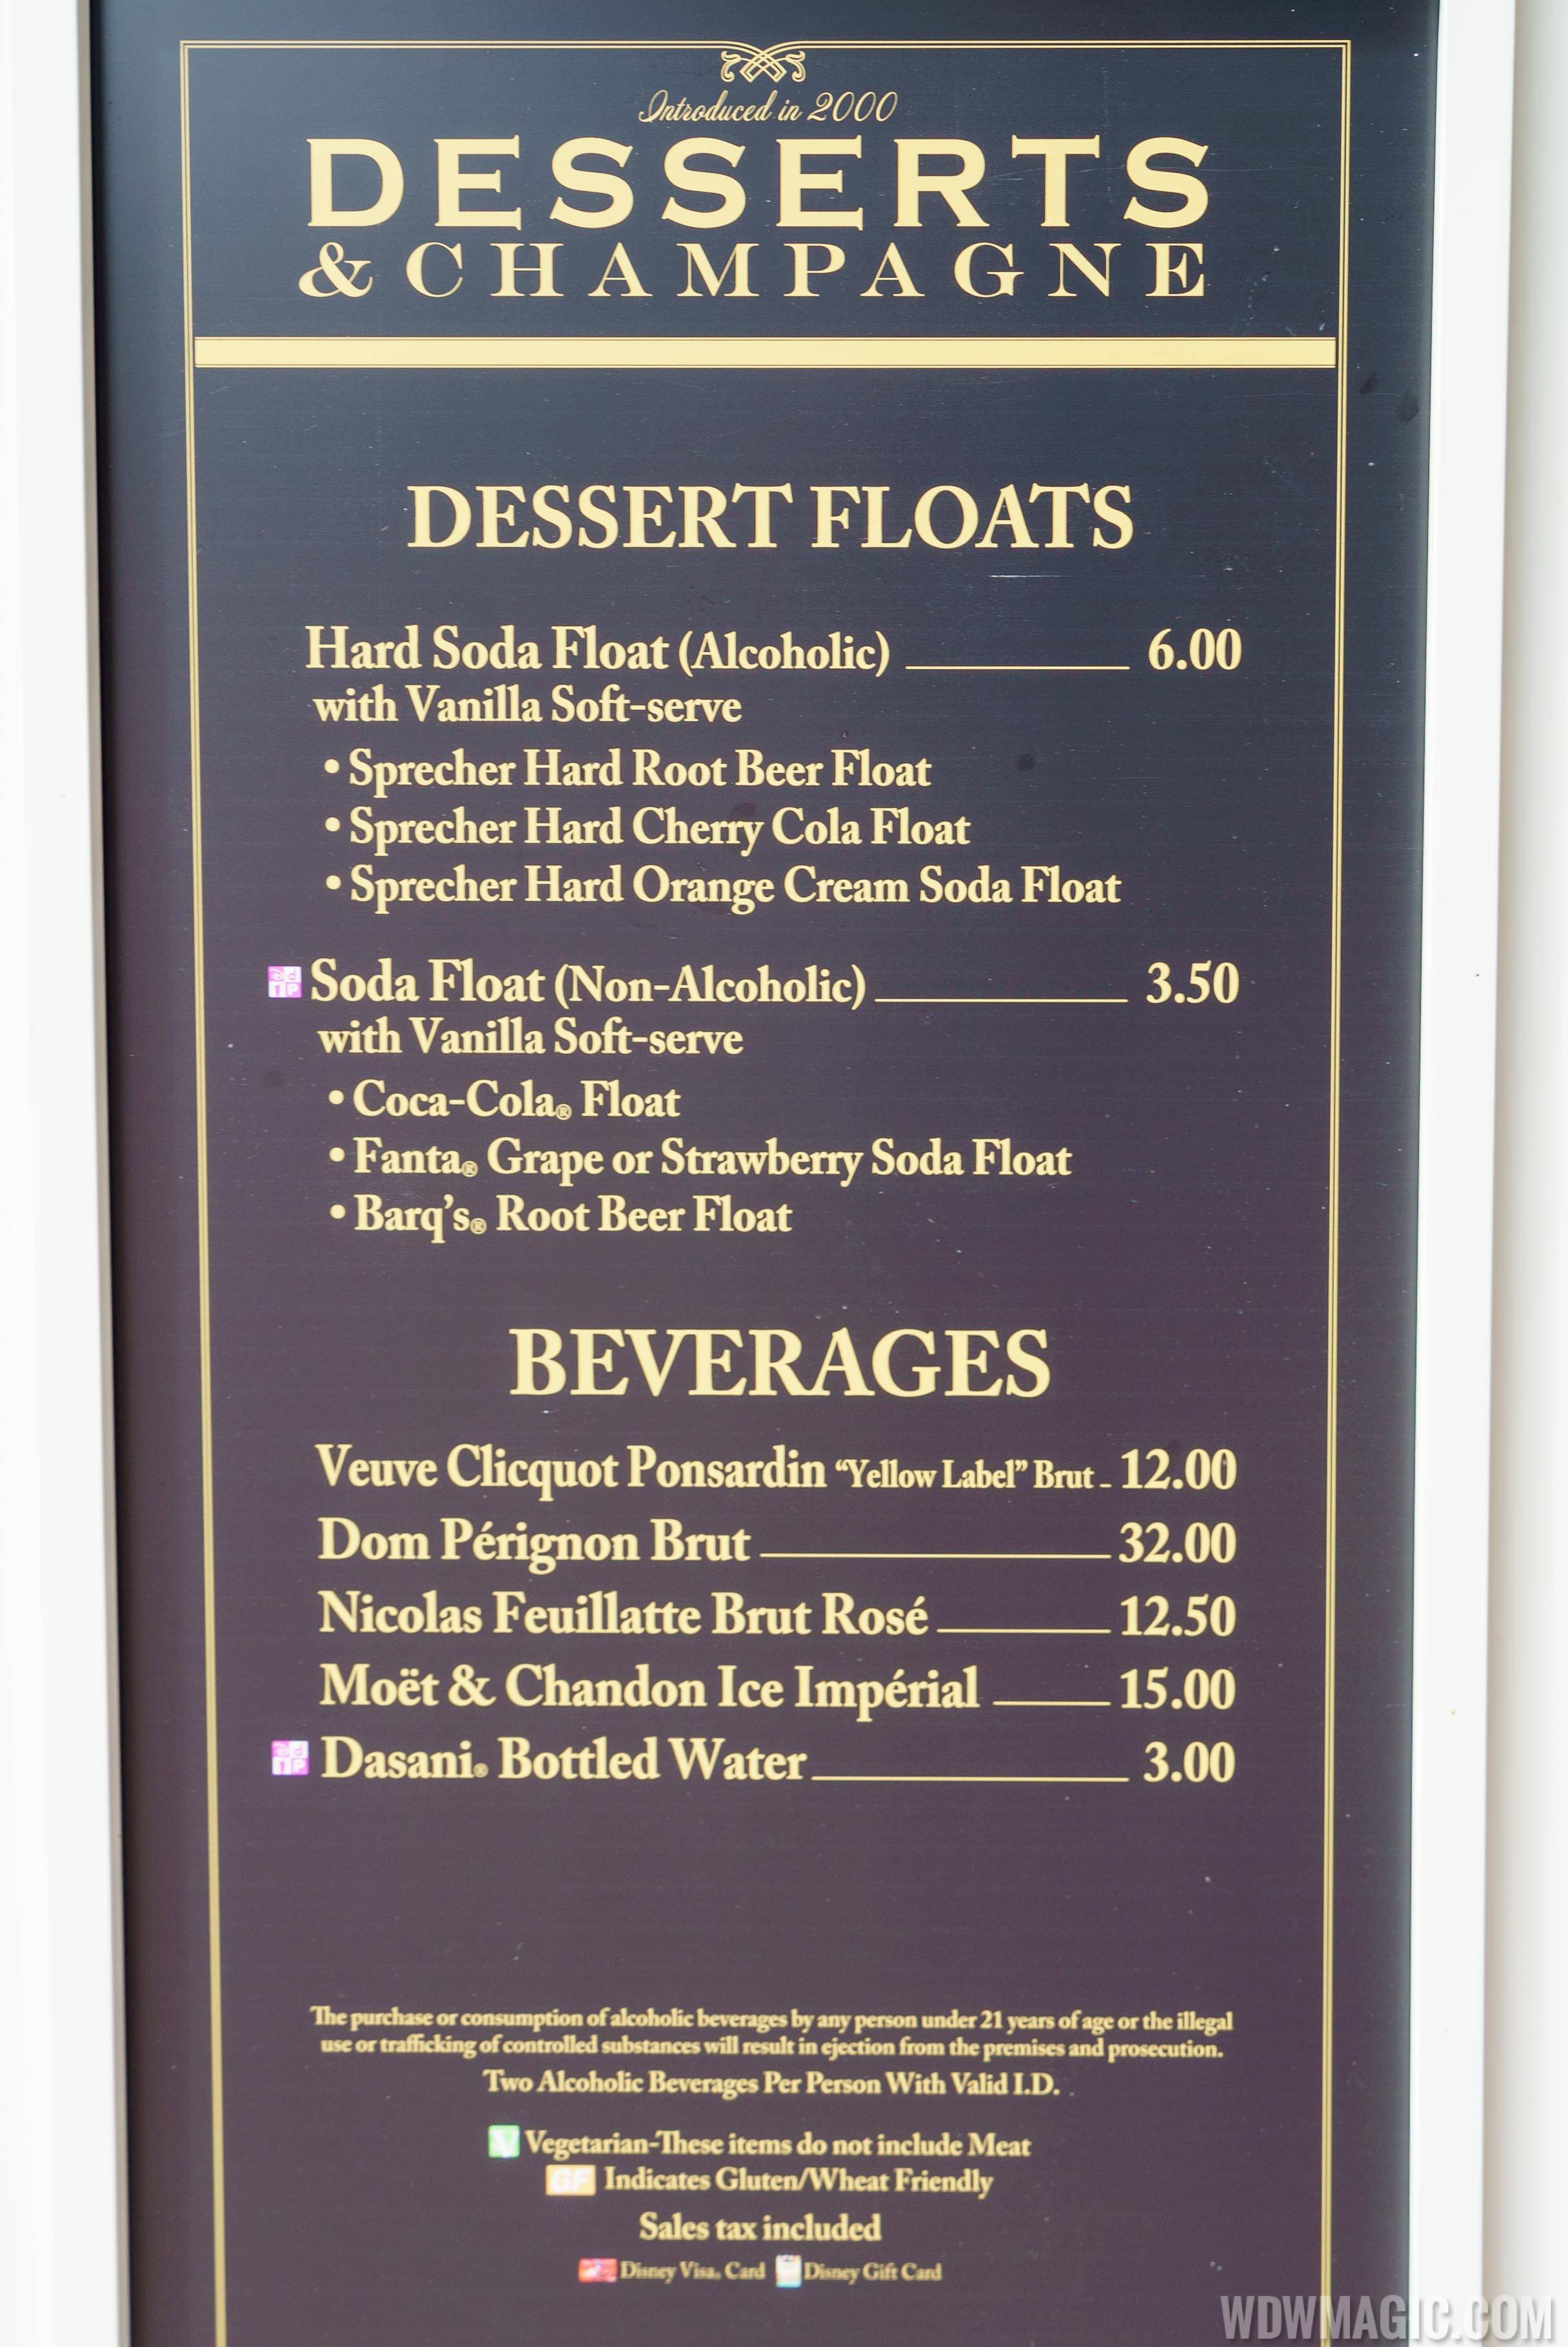 2016 Epcot Food and Wine Festival - Desserts and Champagne menu